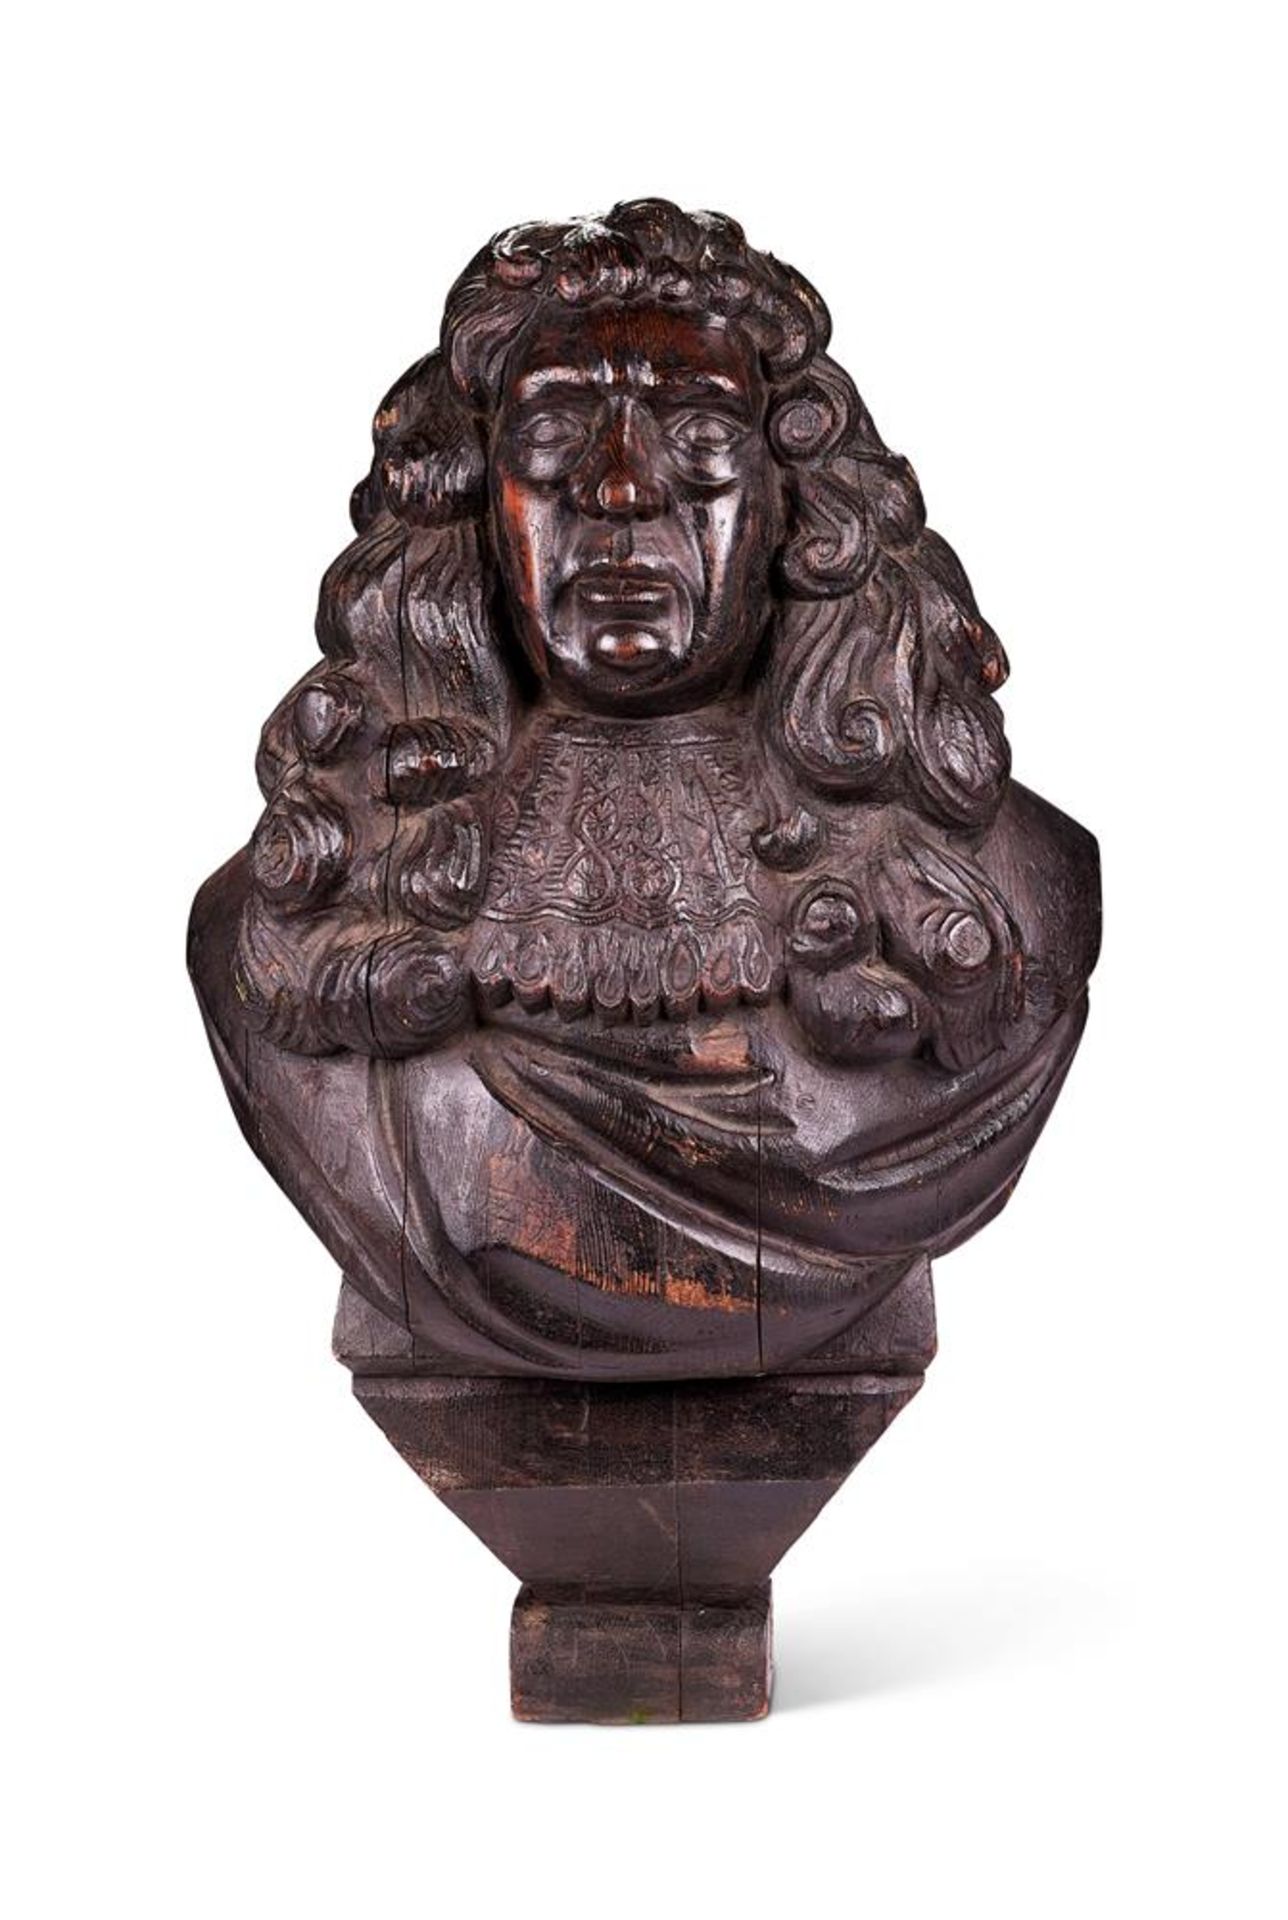 A LARGE CARVED AND STAINED OAK BUST OF SAMUEL PEPYS, EARLY 19TH CENTURY